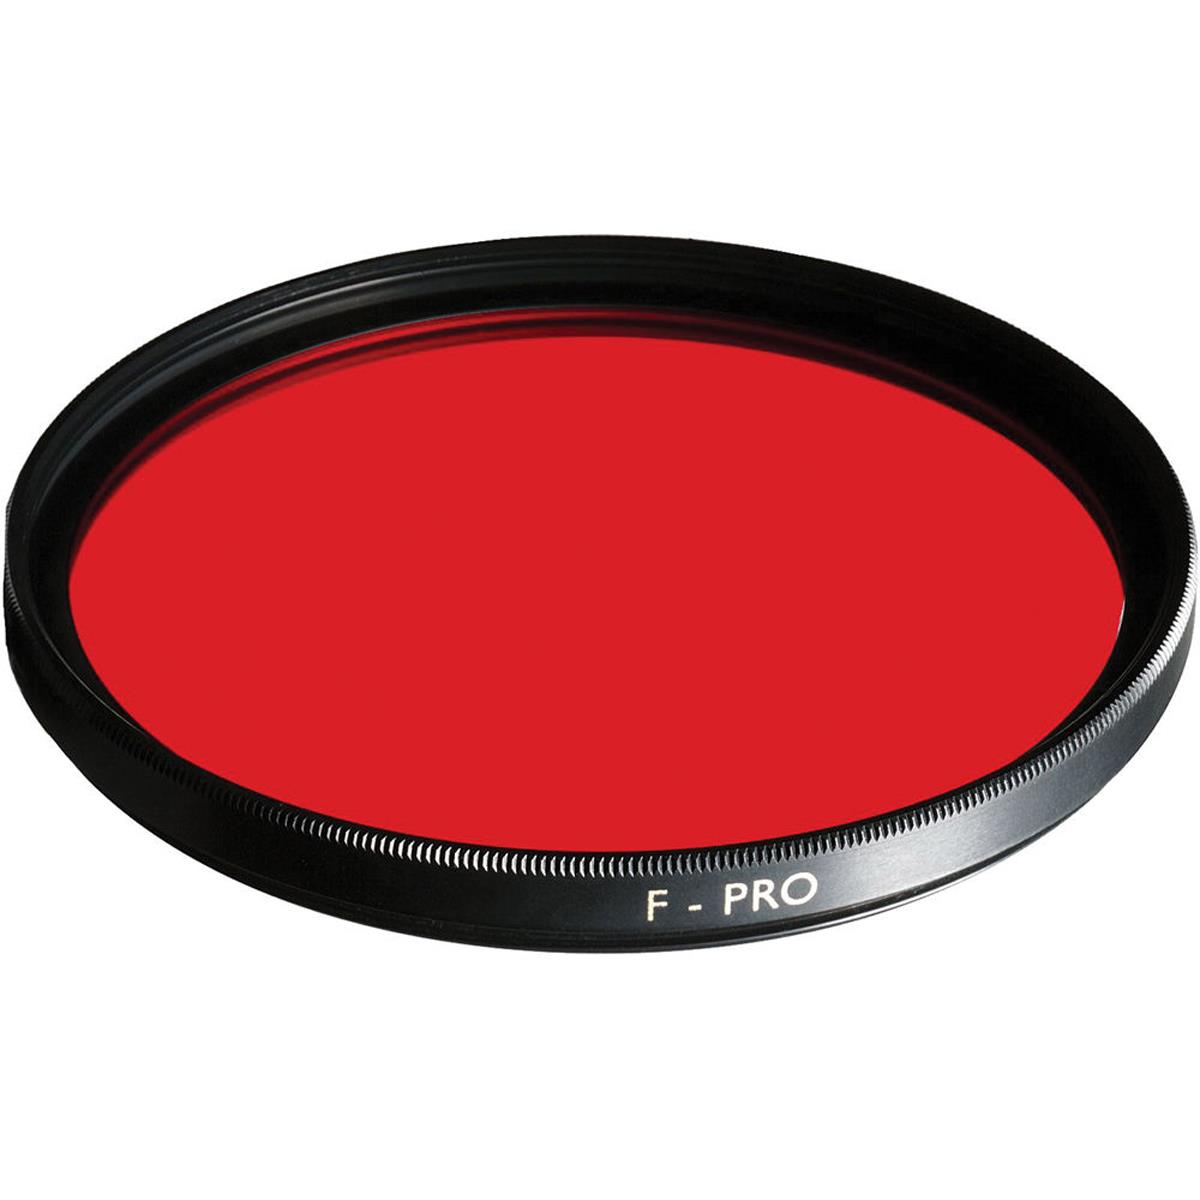 Image of B + W 52mm 091 Filter